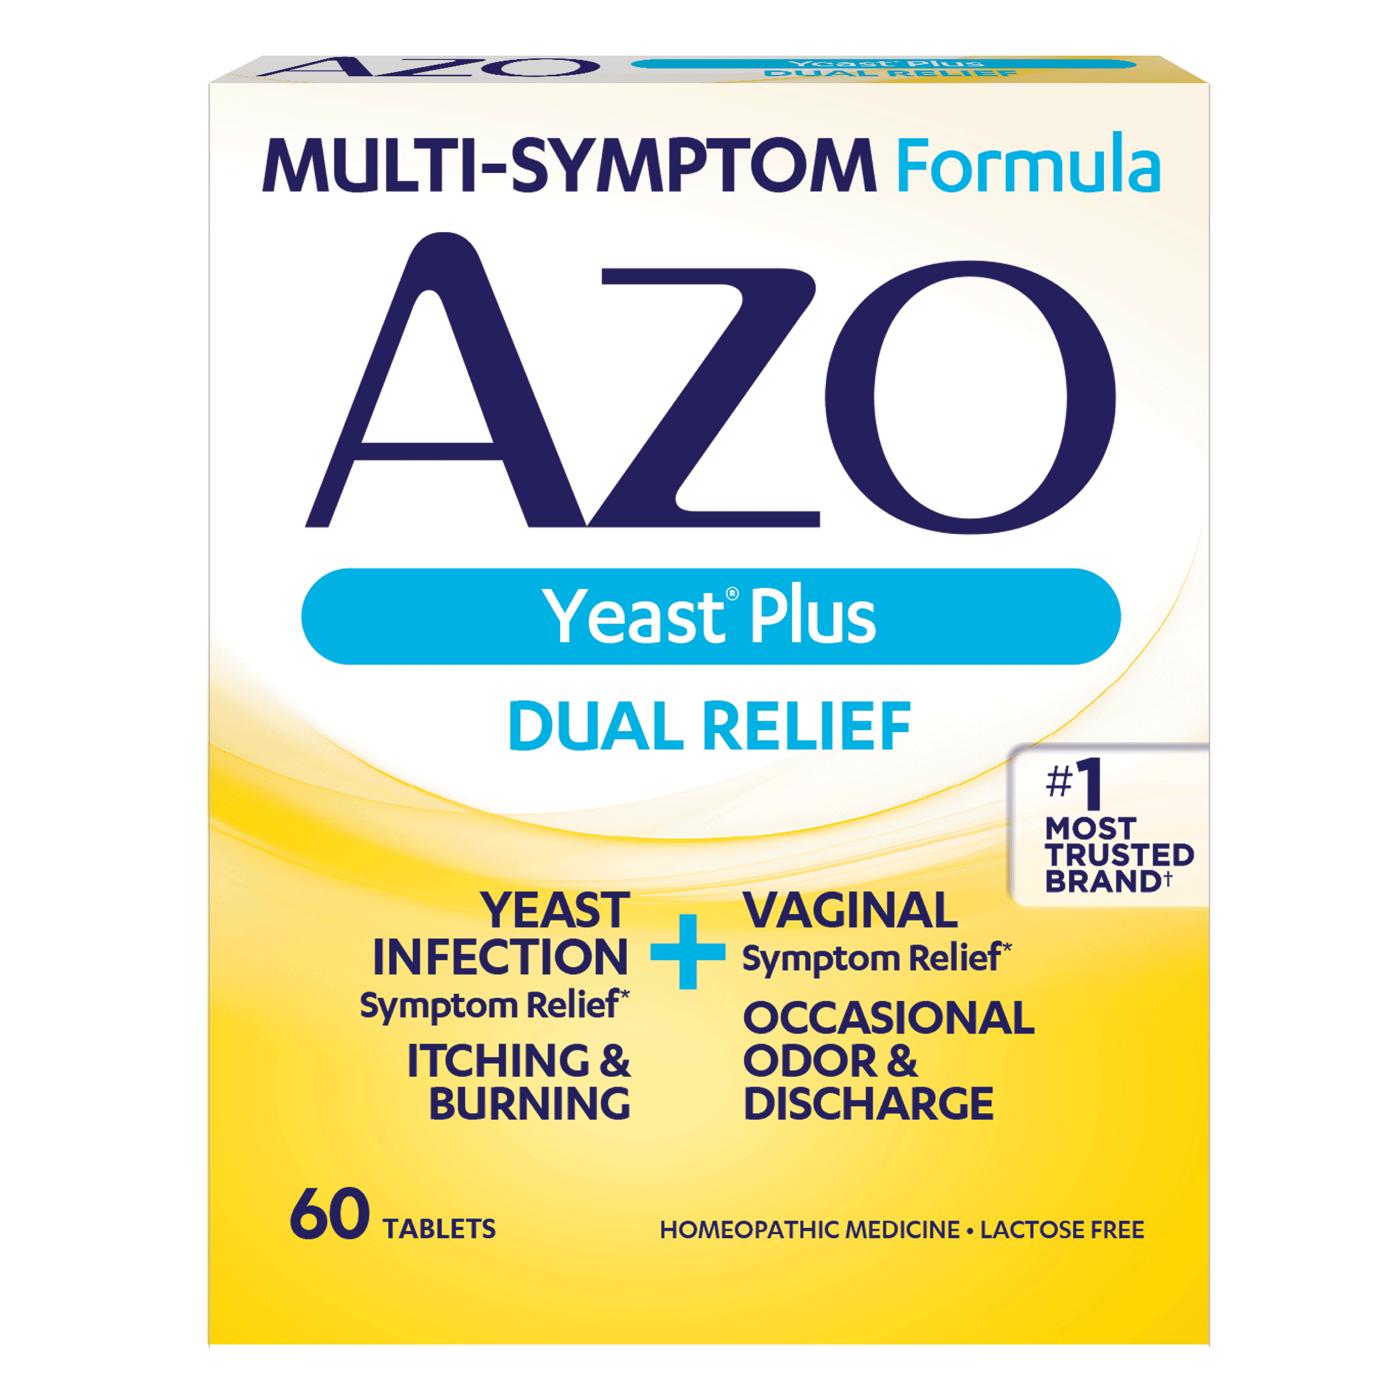 Azo Yeast Plus Yeast Infection Relief Tablets; image 1 of 5